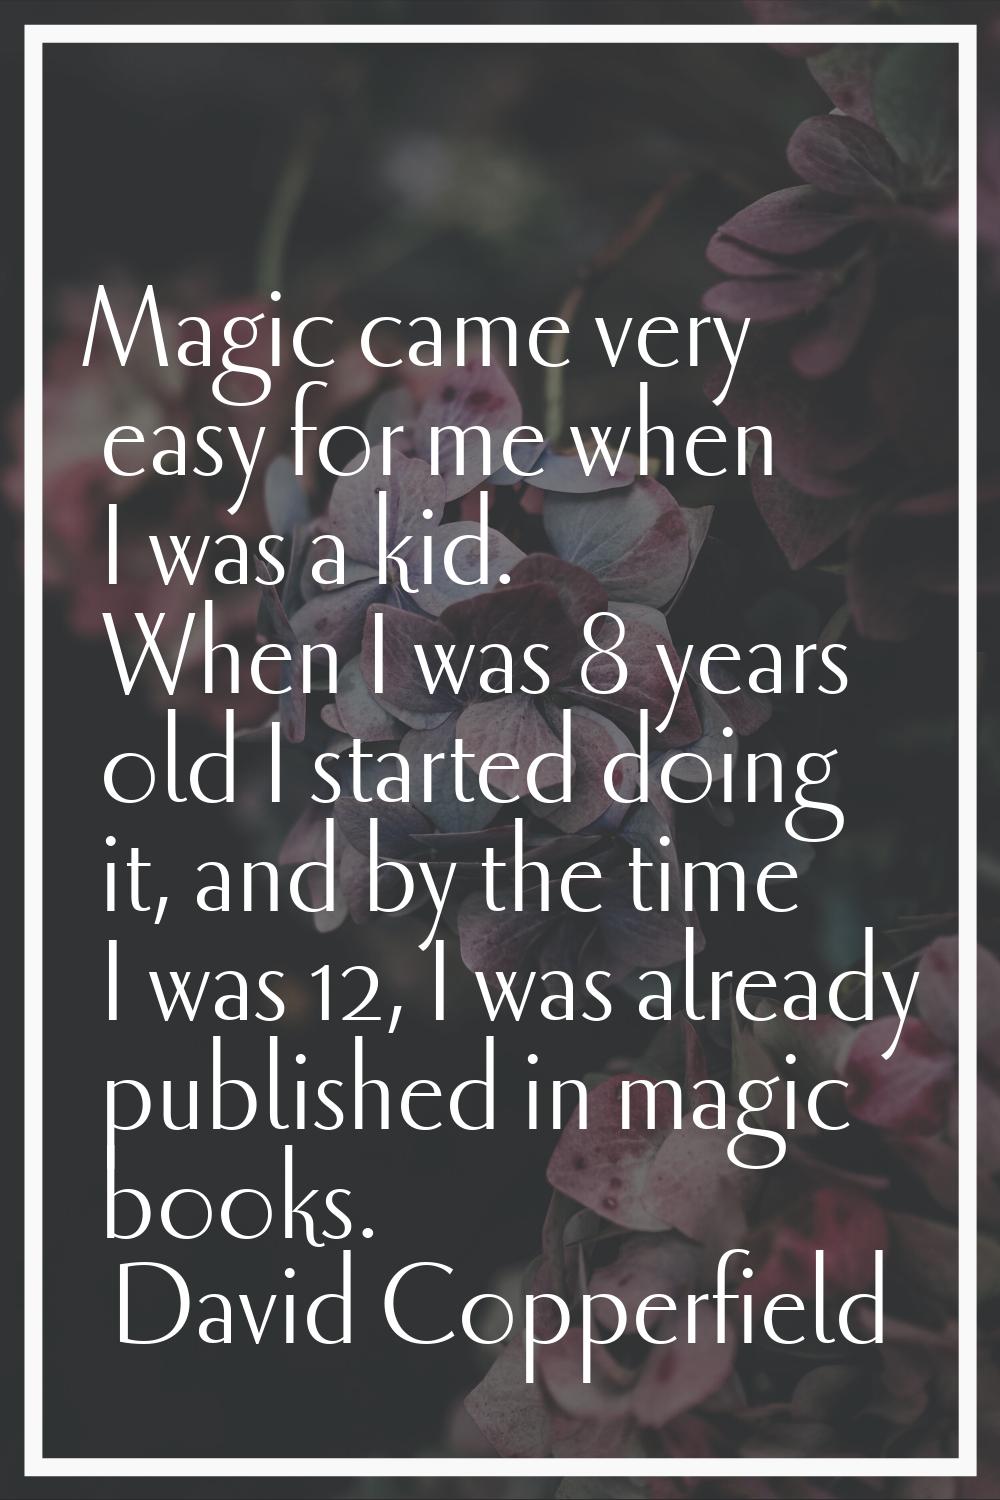 Magic came very easy for me when I was a kid. When I was 8 years old I started doing it, and by the